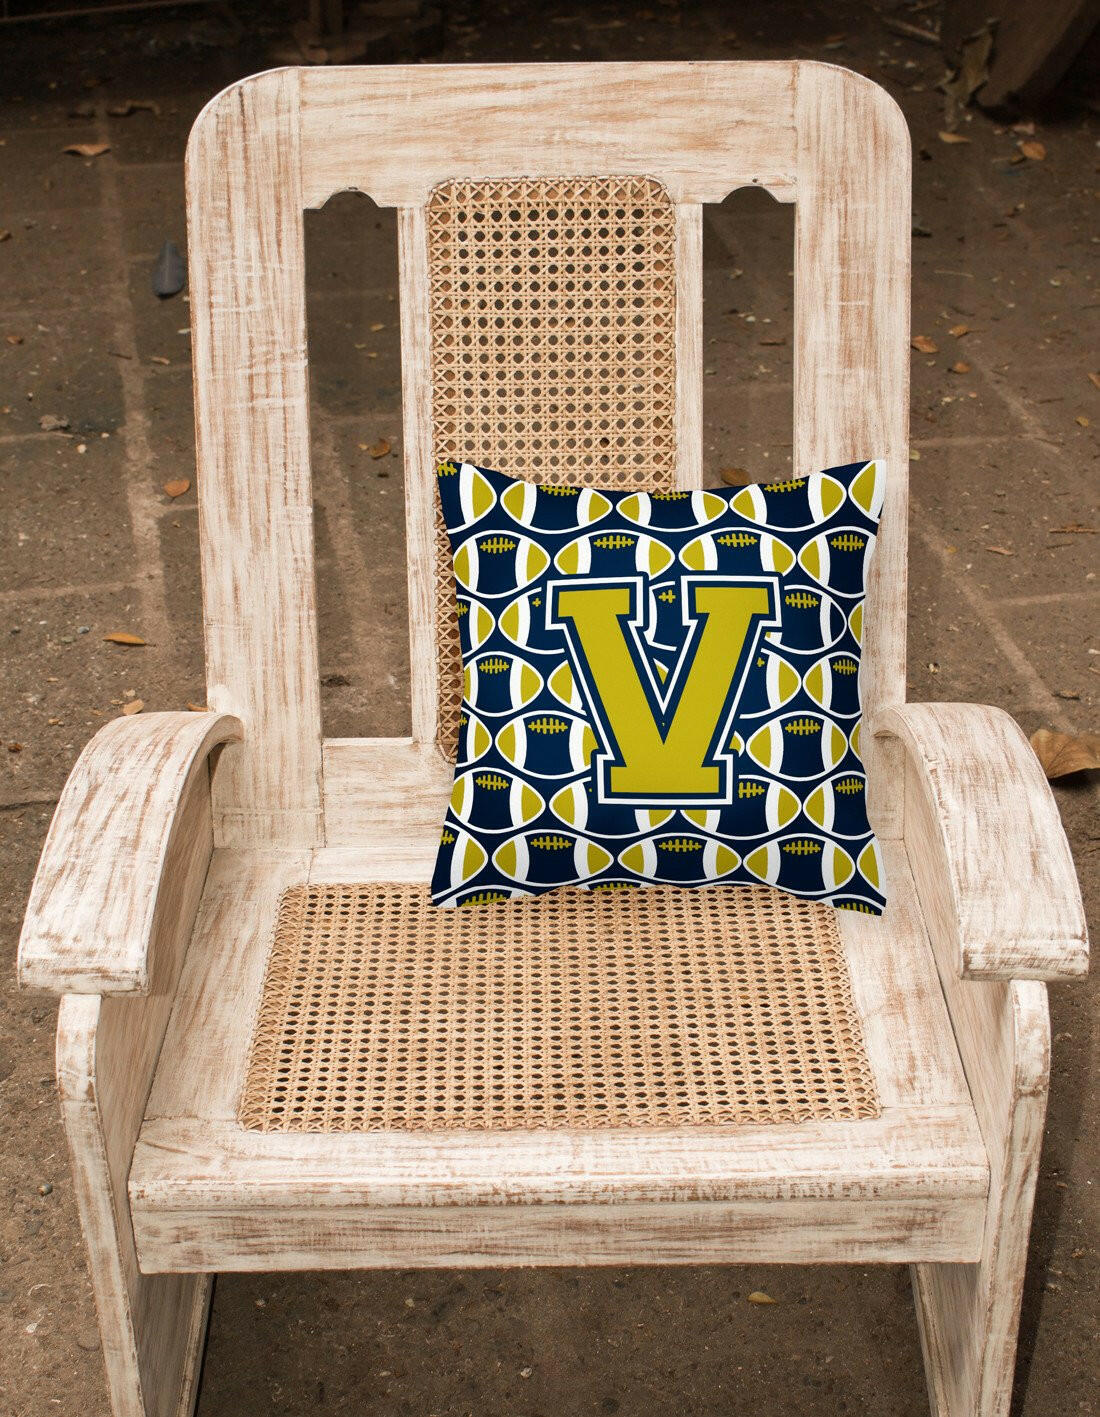 Letter V Football Blue and Gold Fabric Decorative Pillow CJ1074-VPW1414 by Caroline's Treasures